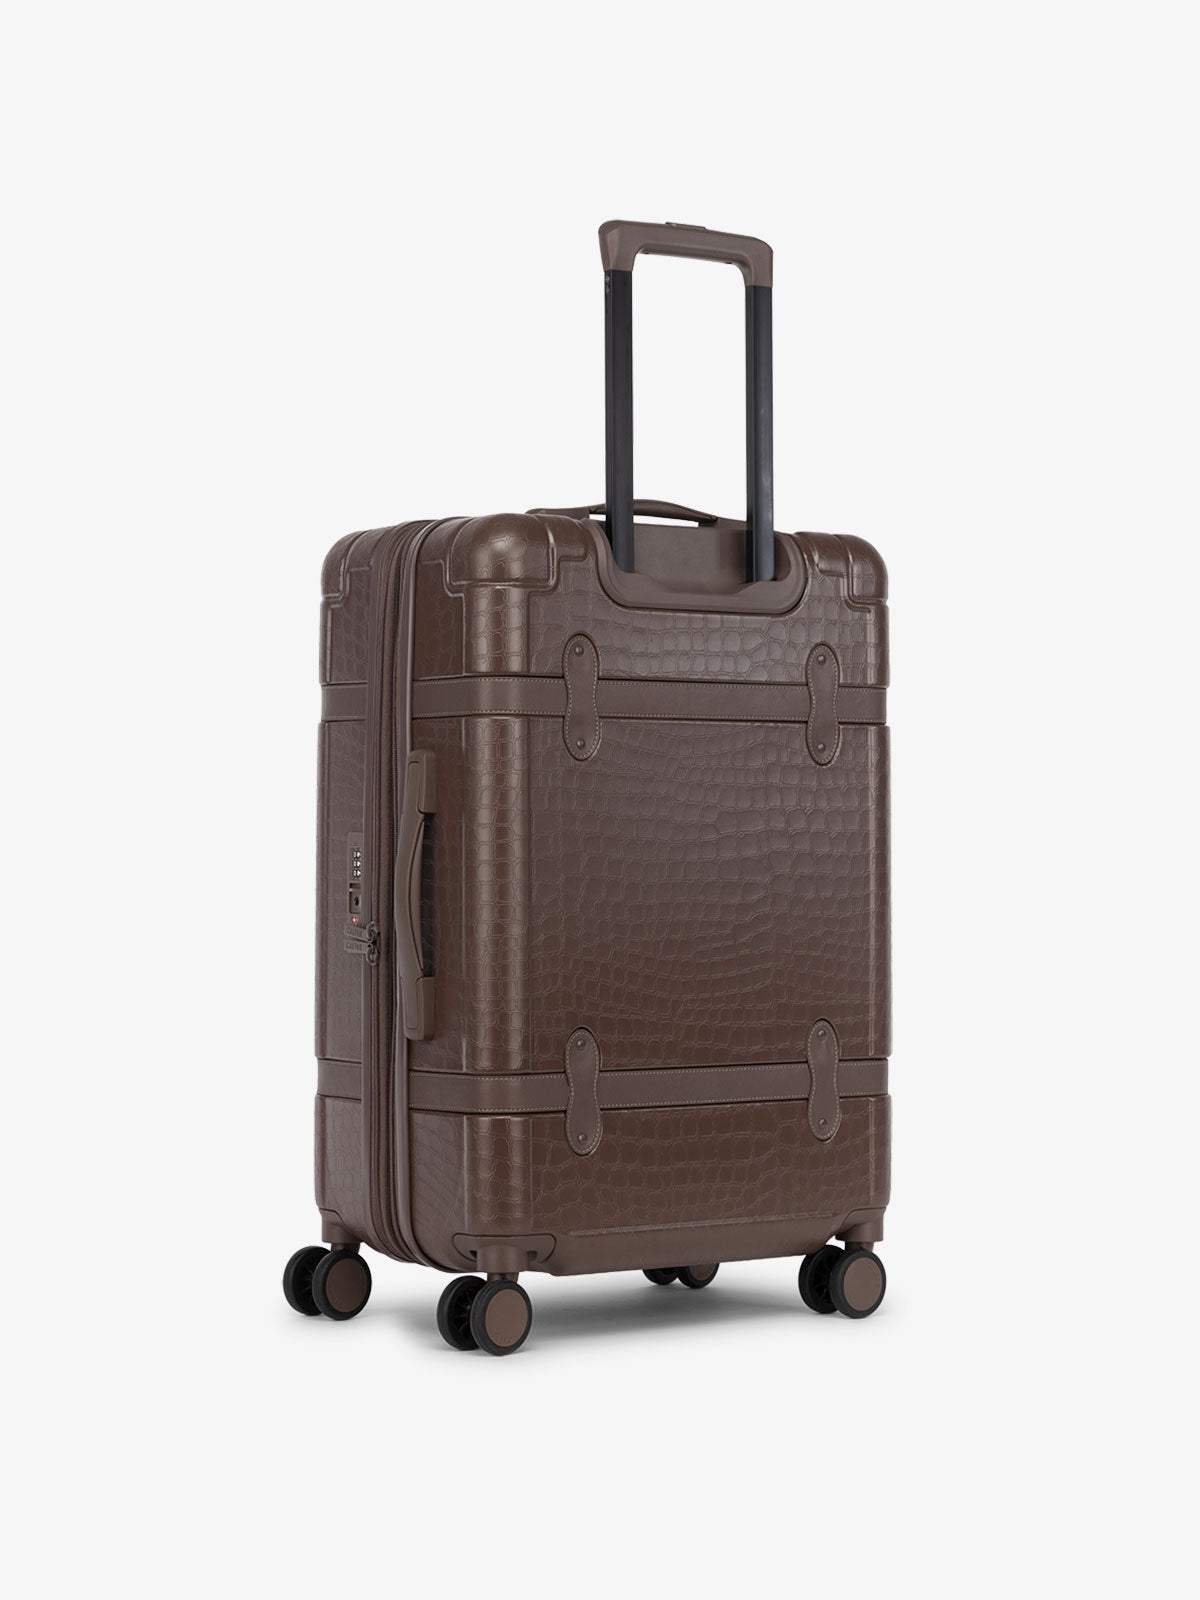 CALPAK TRNK 25 inch medium luggage with TSA approved locks and top and side carrying handles in espresso